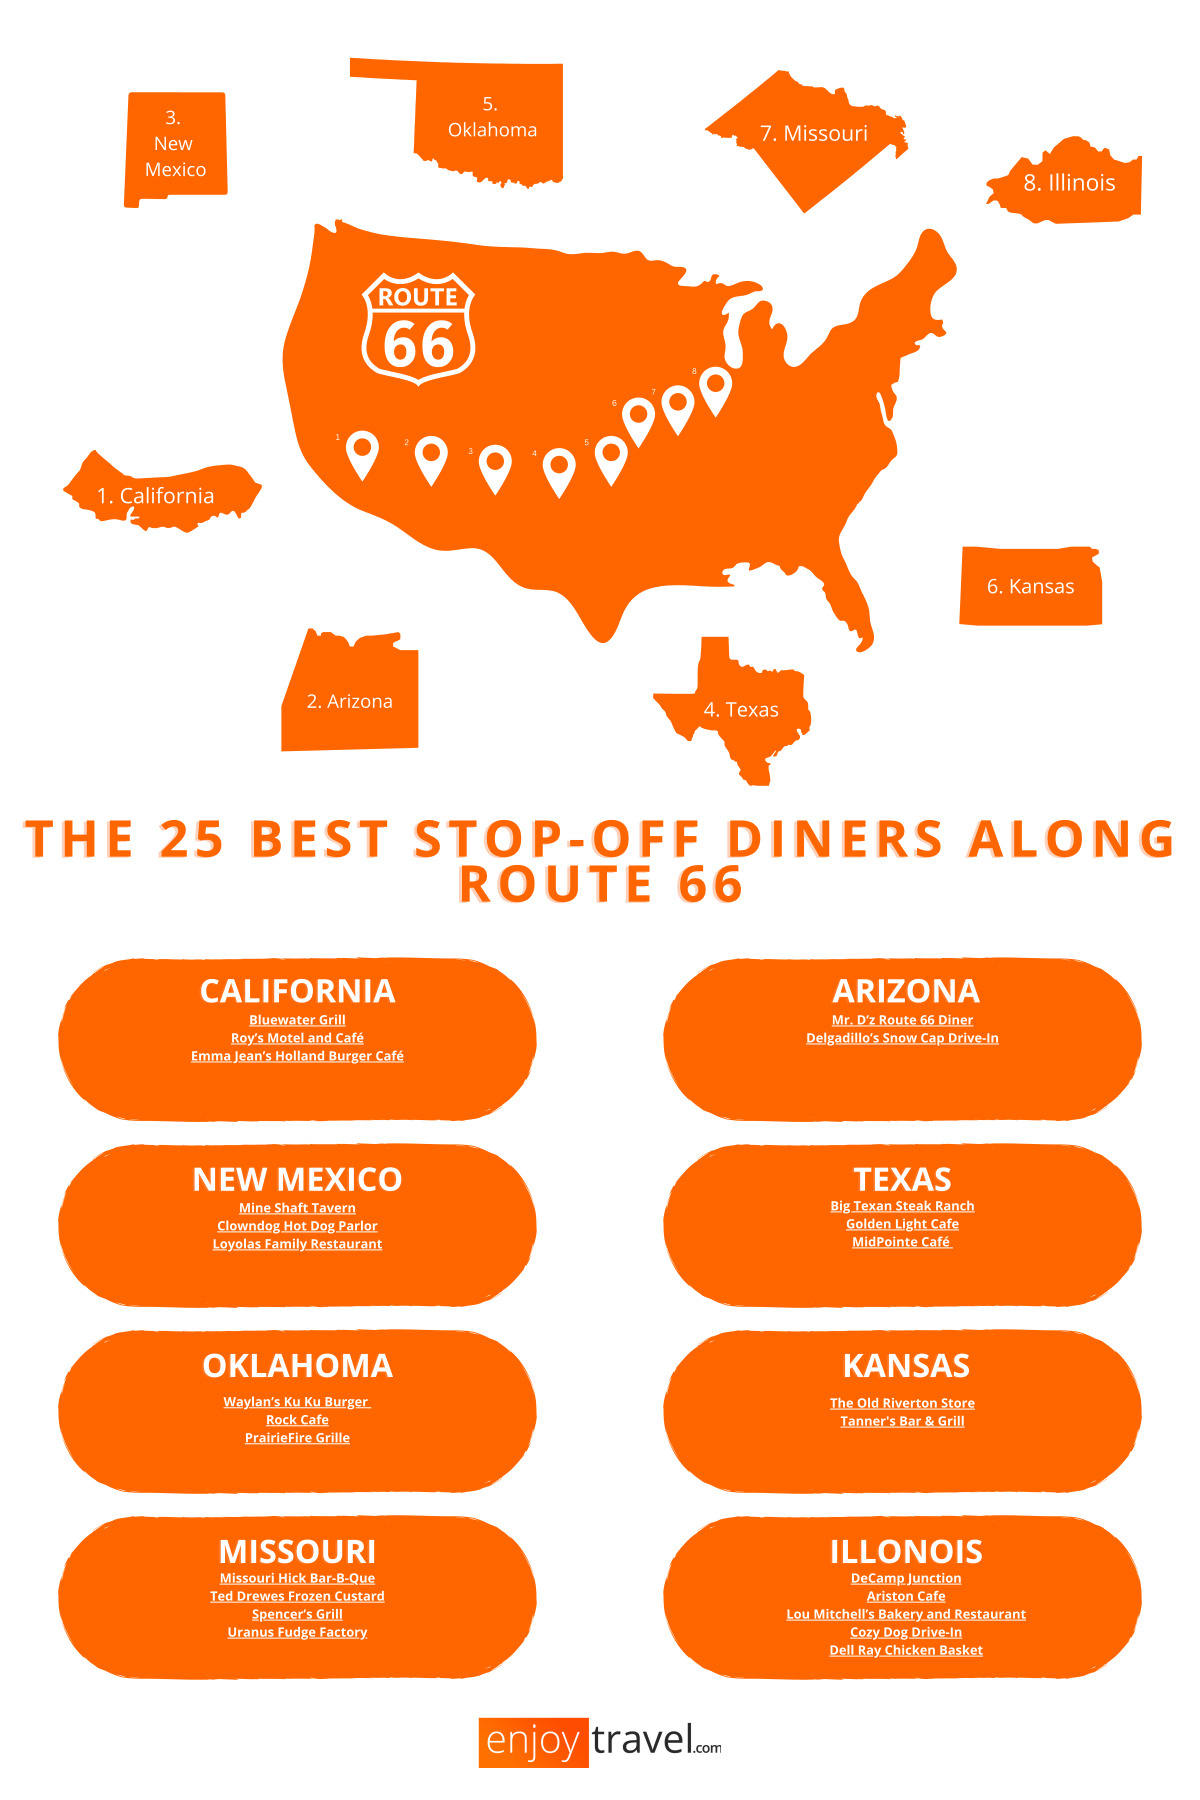 Best stop-off Diners